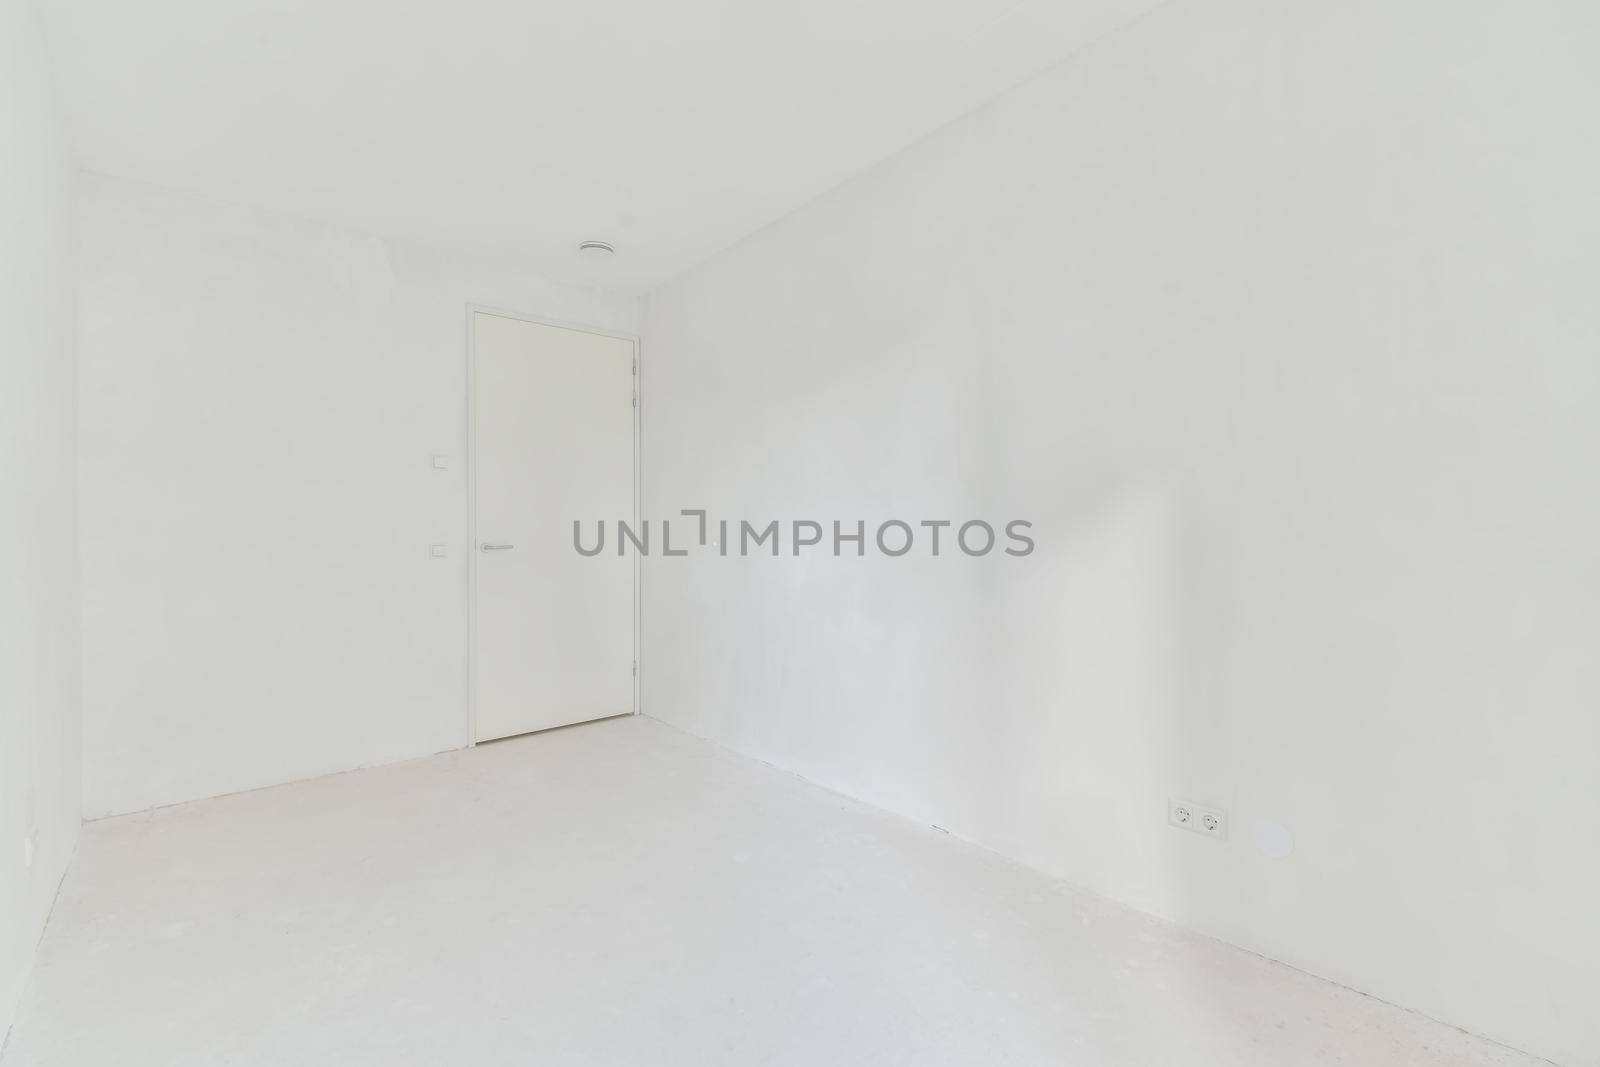 A completely white room by casamedia